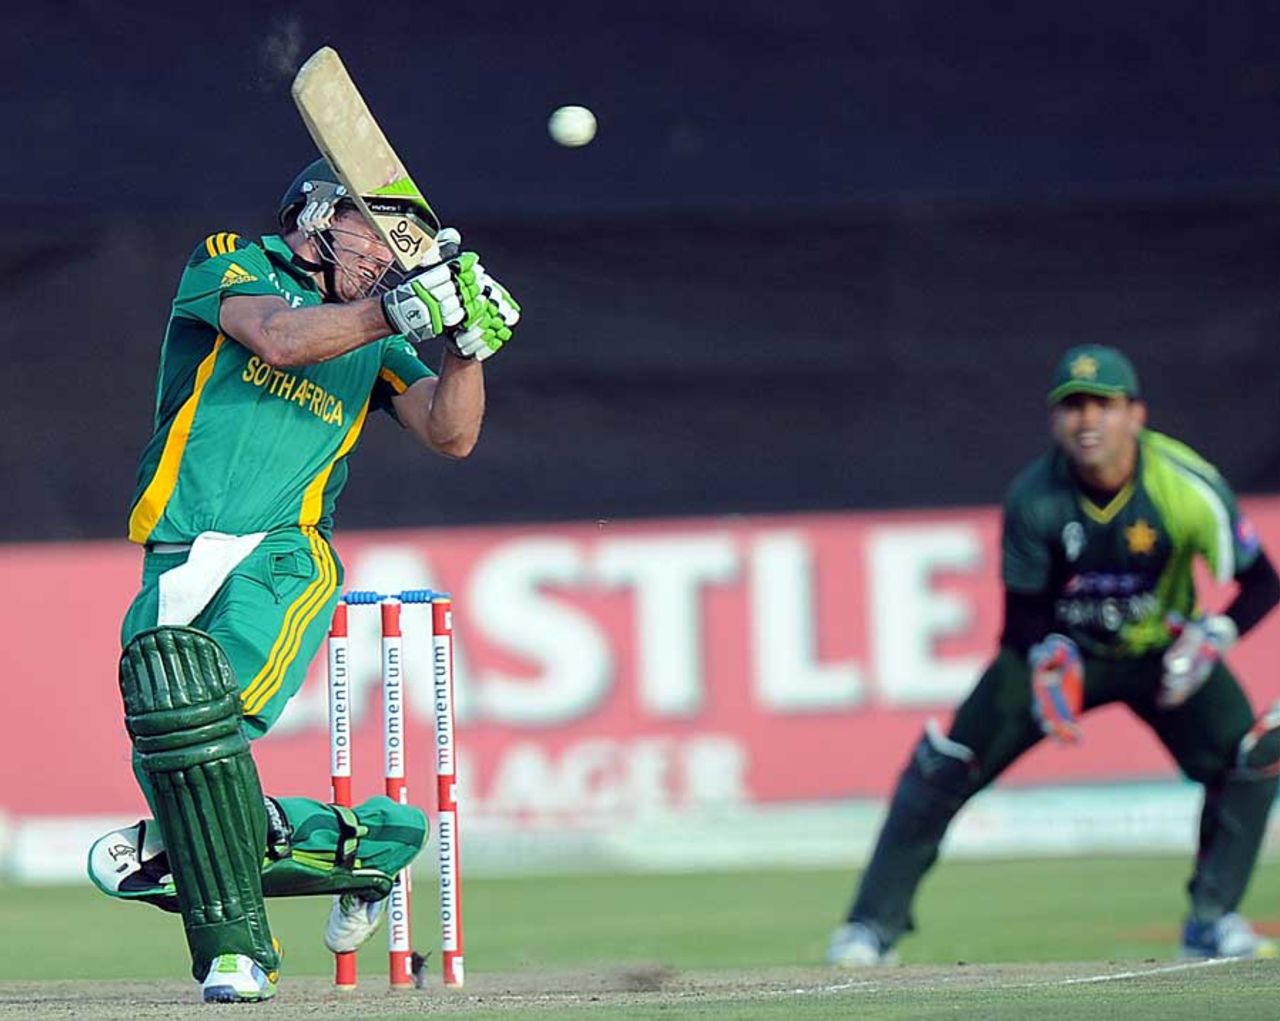 AB de Villiers goes after a short one, South Africa v Pakistan, 5th ODI, Benoni, March 24, 2013